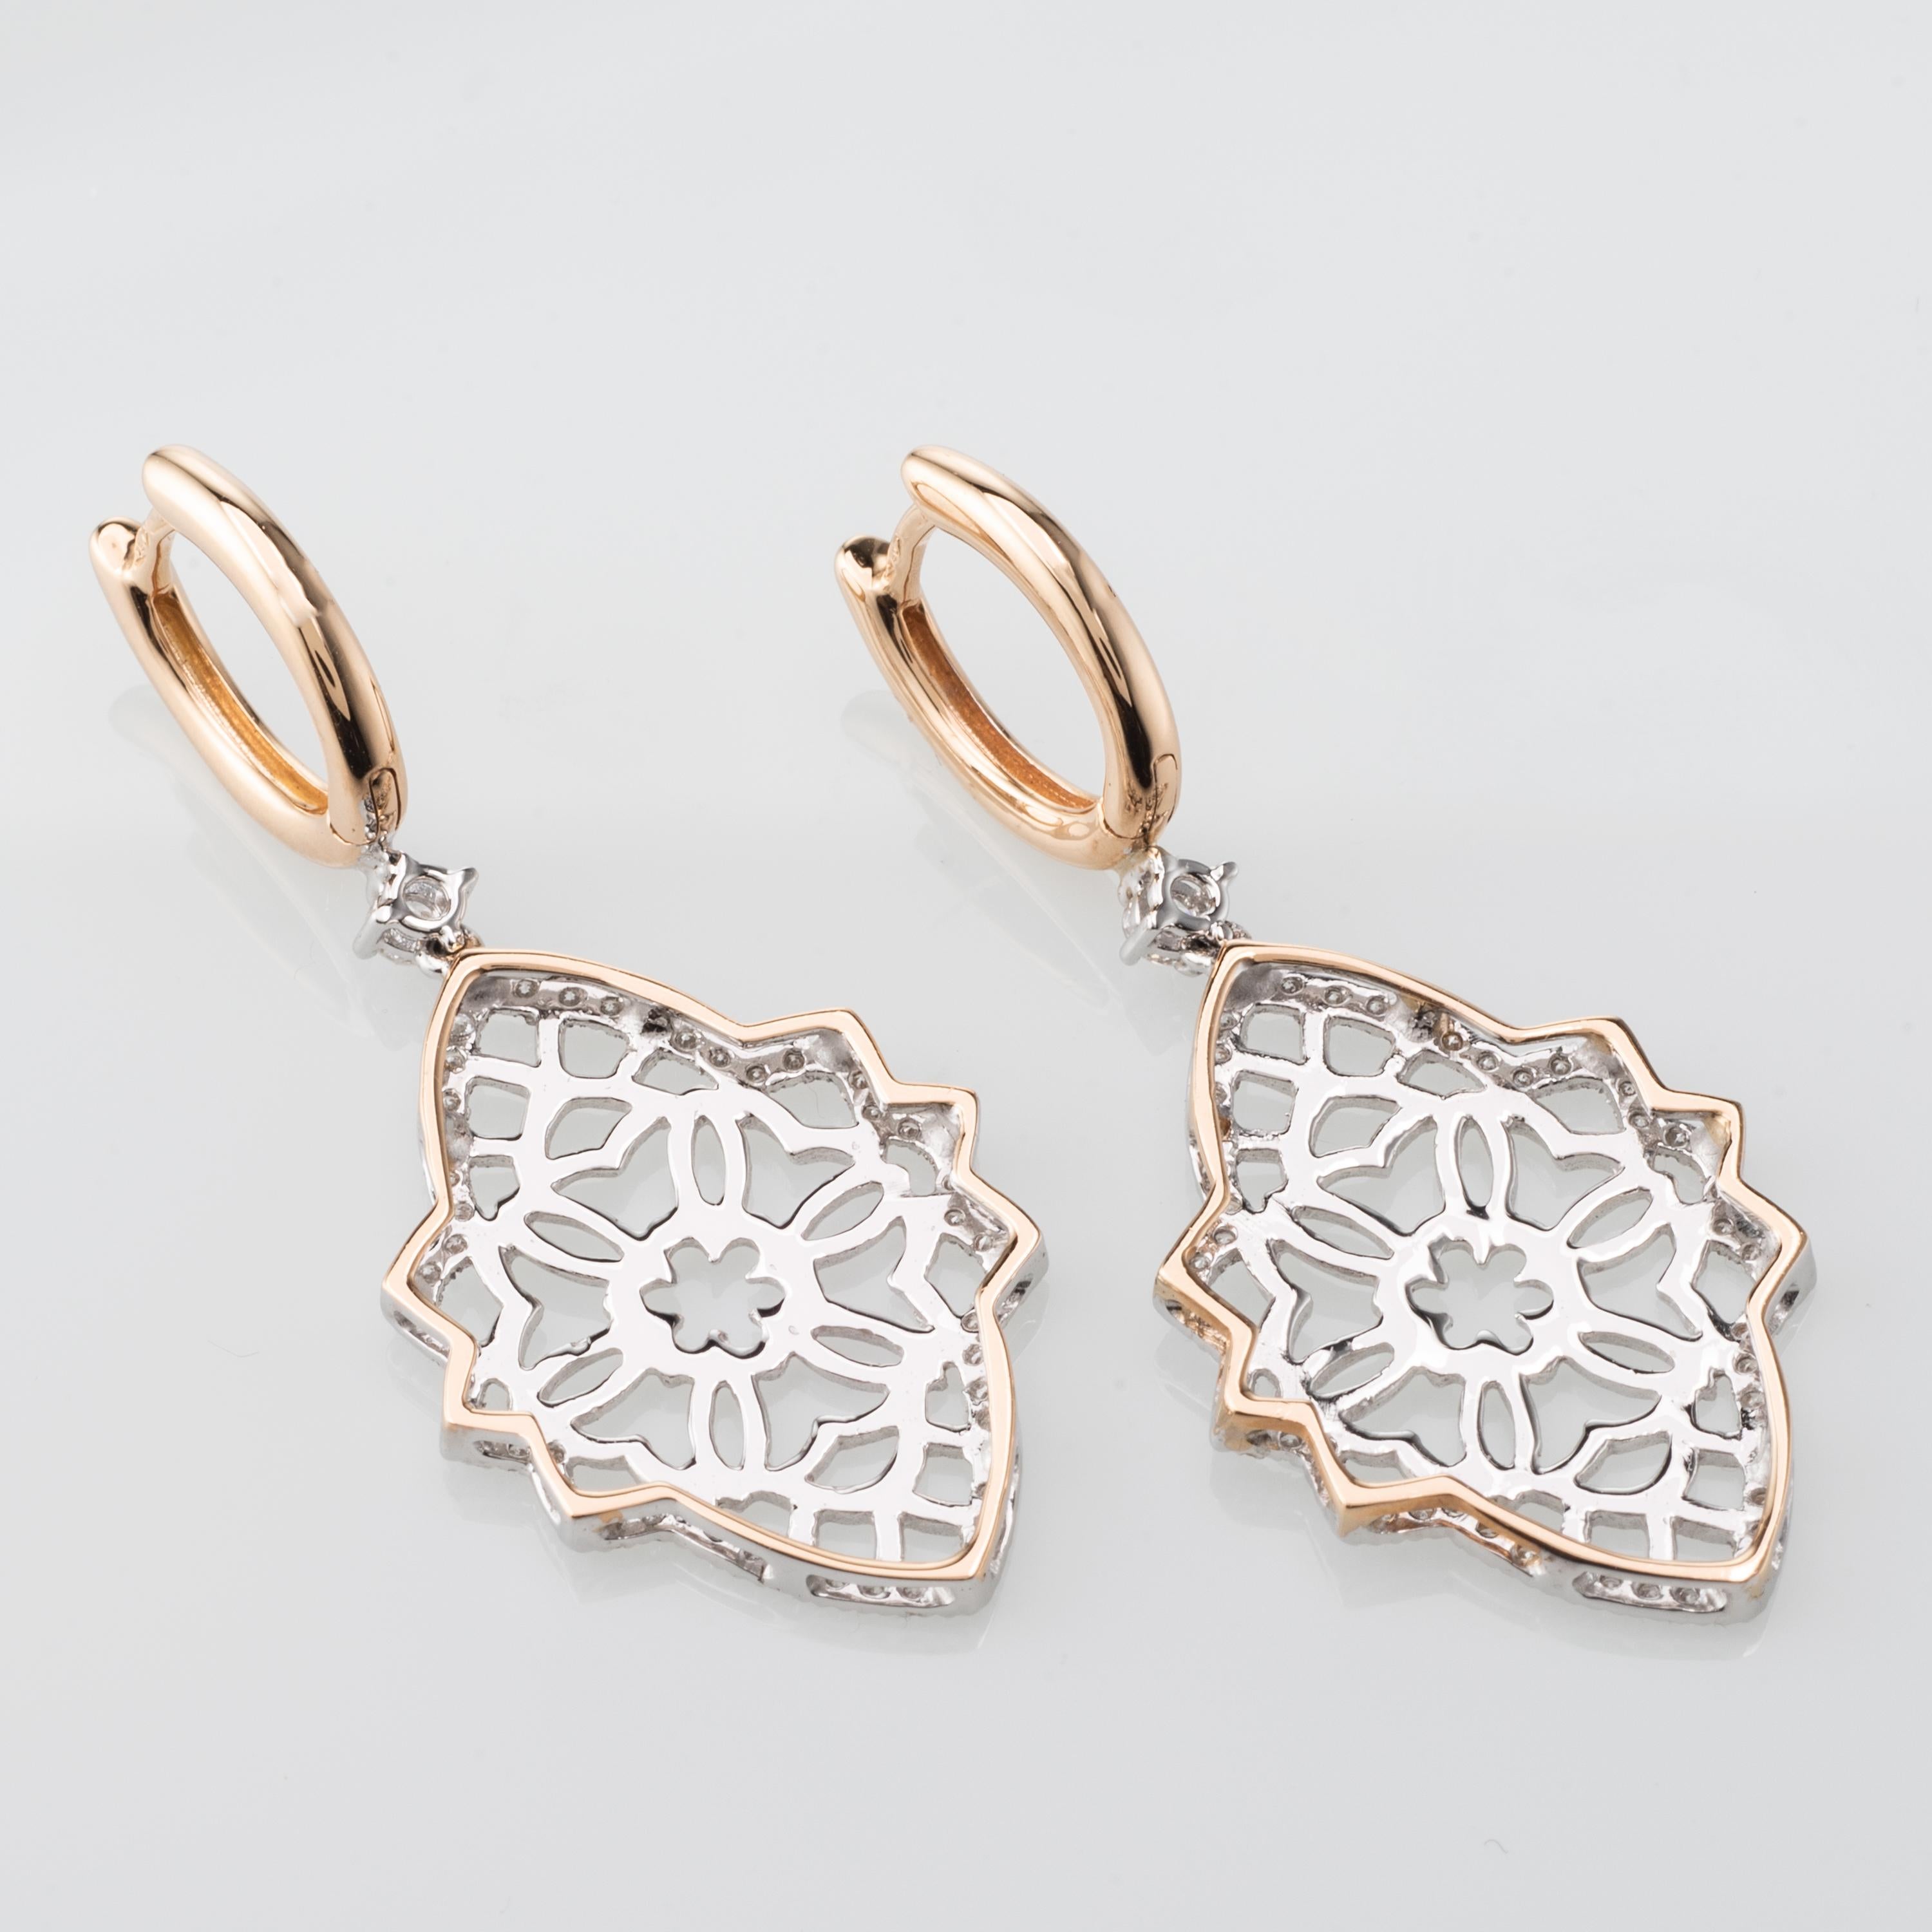 These masterfully crafted Earrings are enhanced by 0.44 Carat of Diamonds set in 18 Karat White and Rose Gold. Made in Italy.